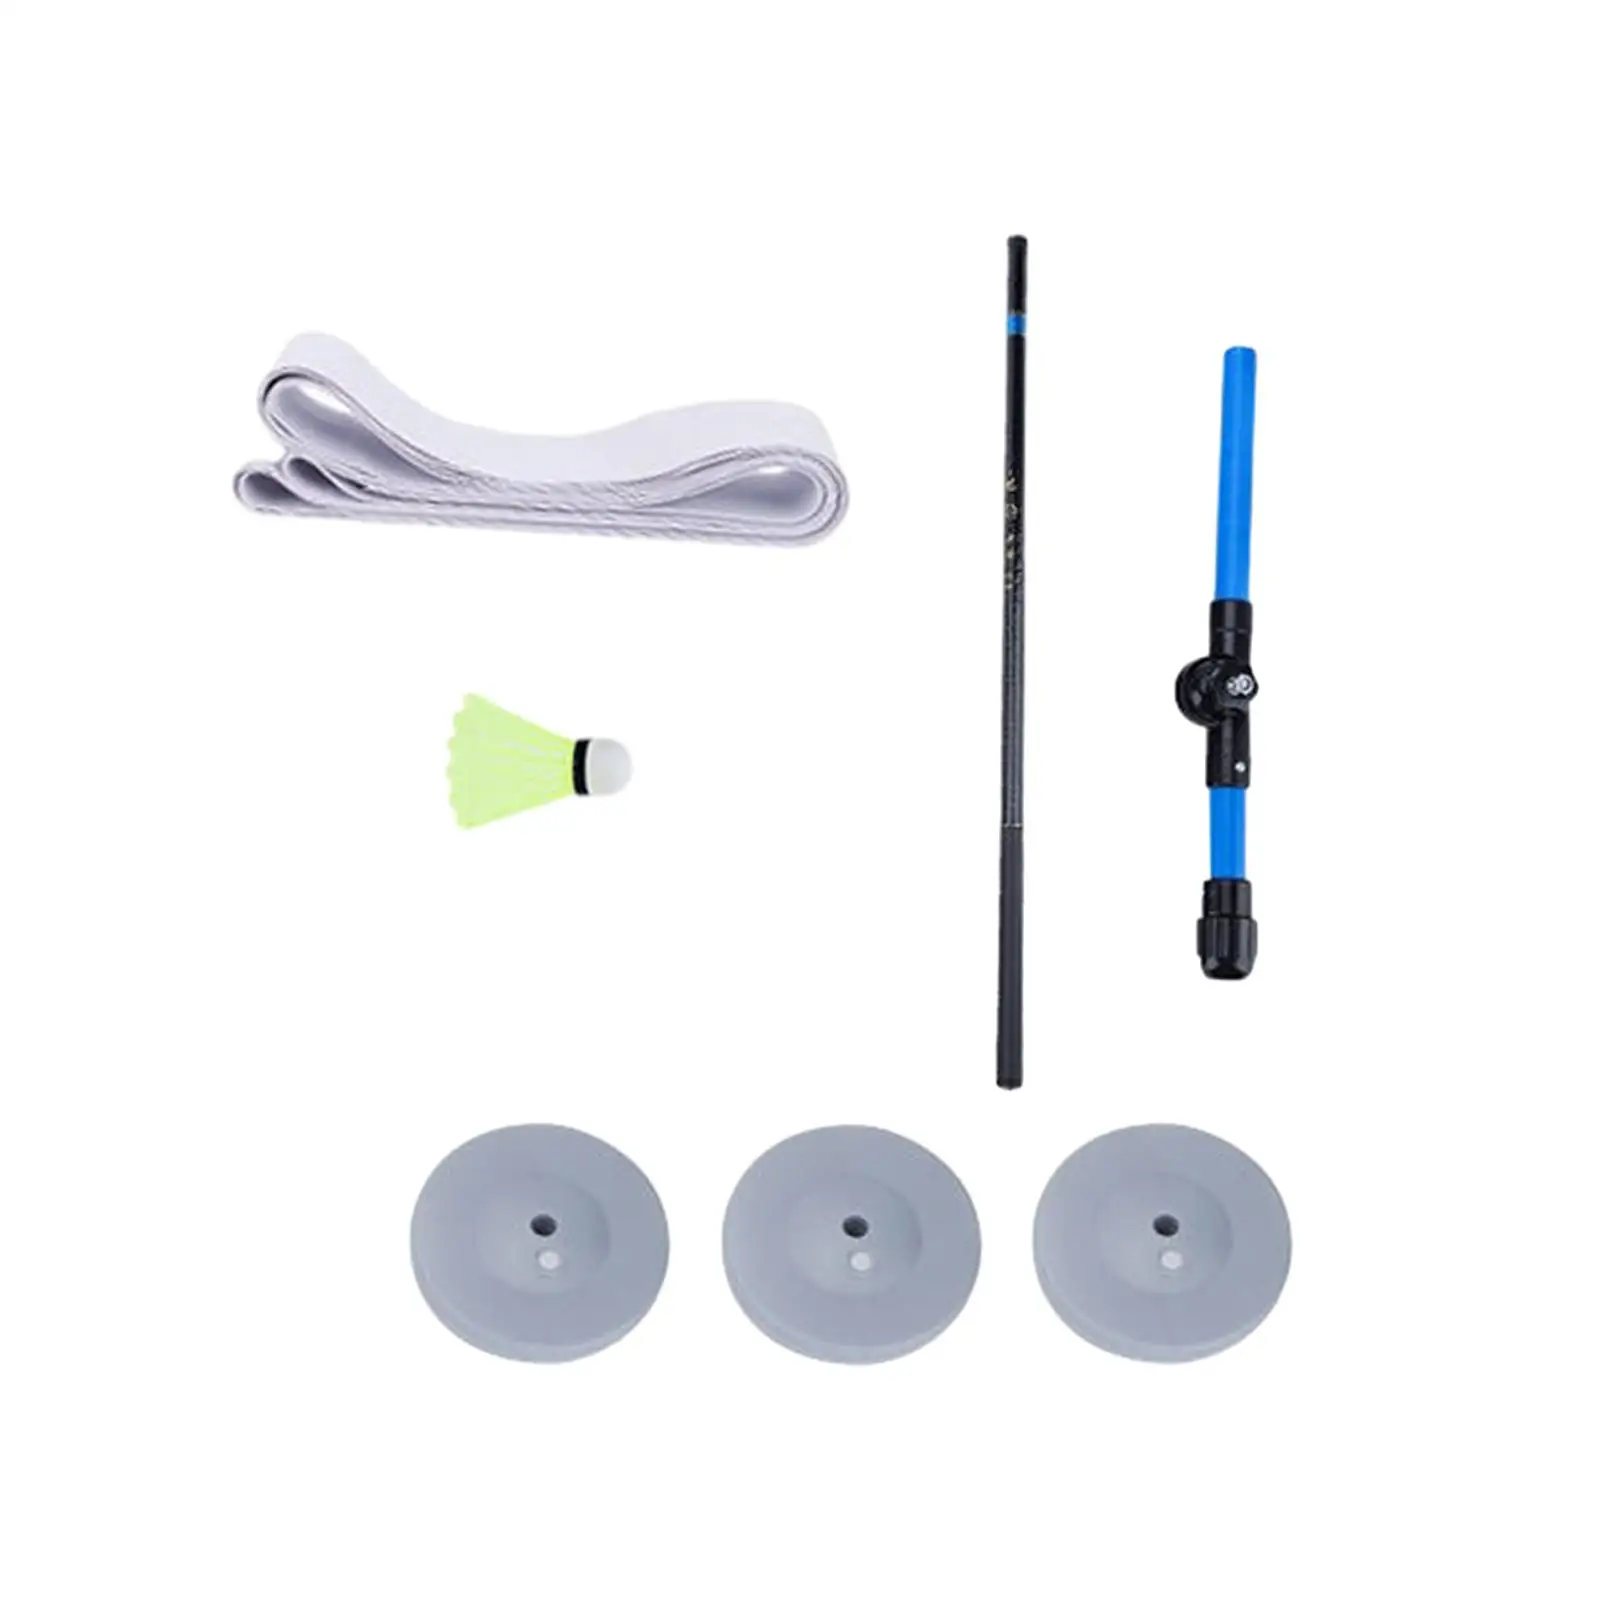 Badminton Trainer Equipment Self Practice Tool for Indoor Playing Exercising